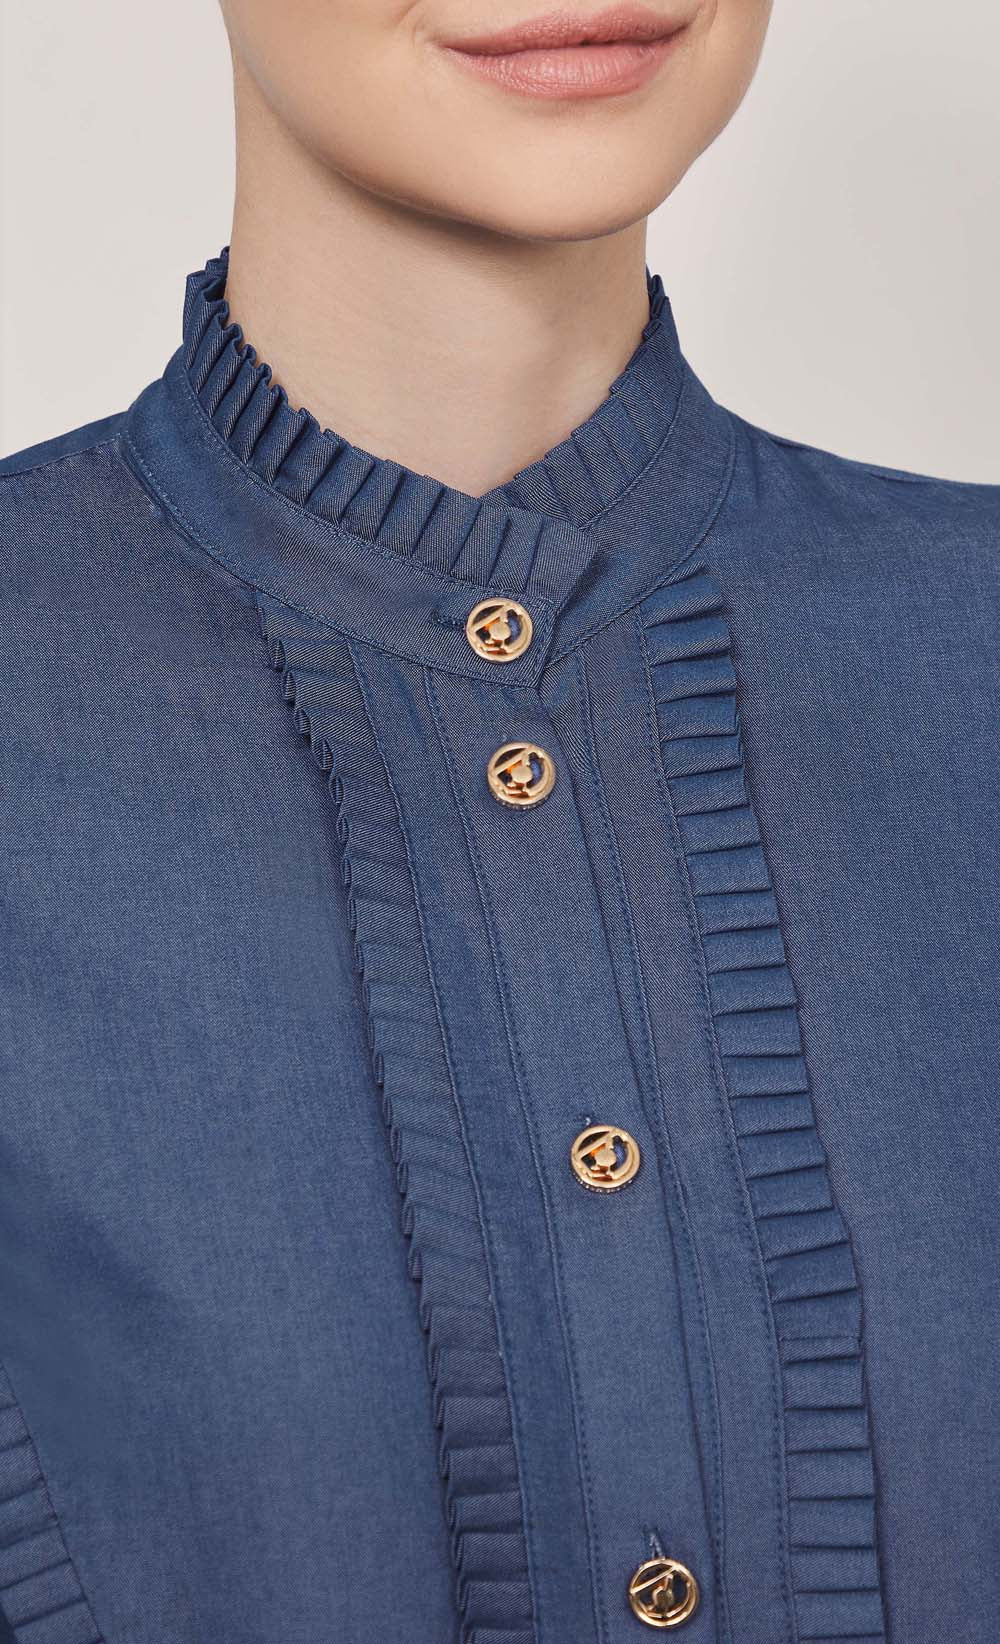 Pleated Trim Shirt in Chambray